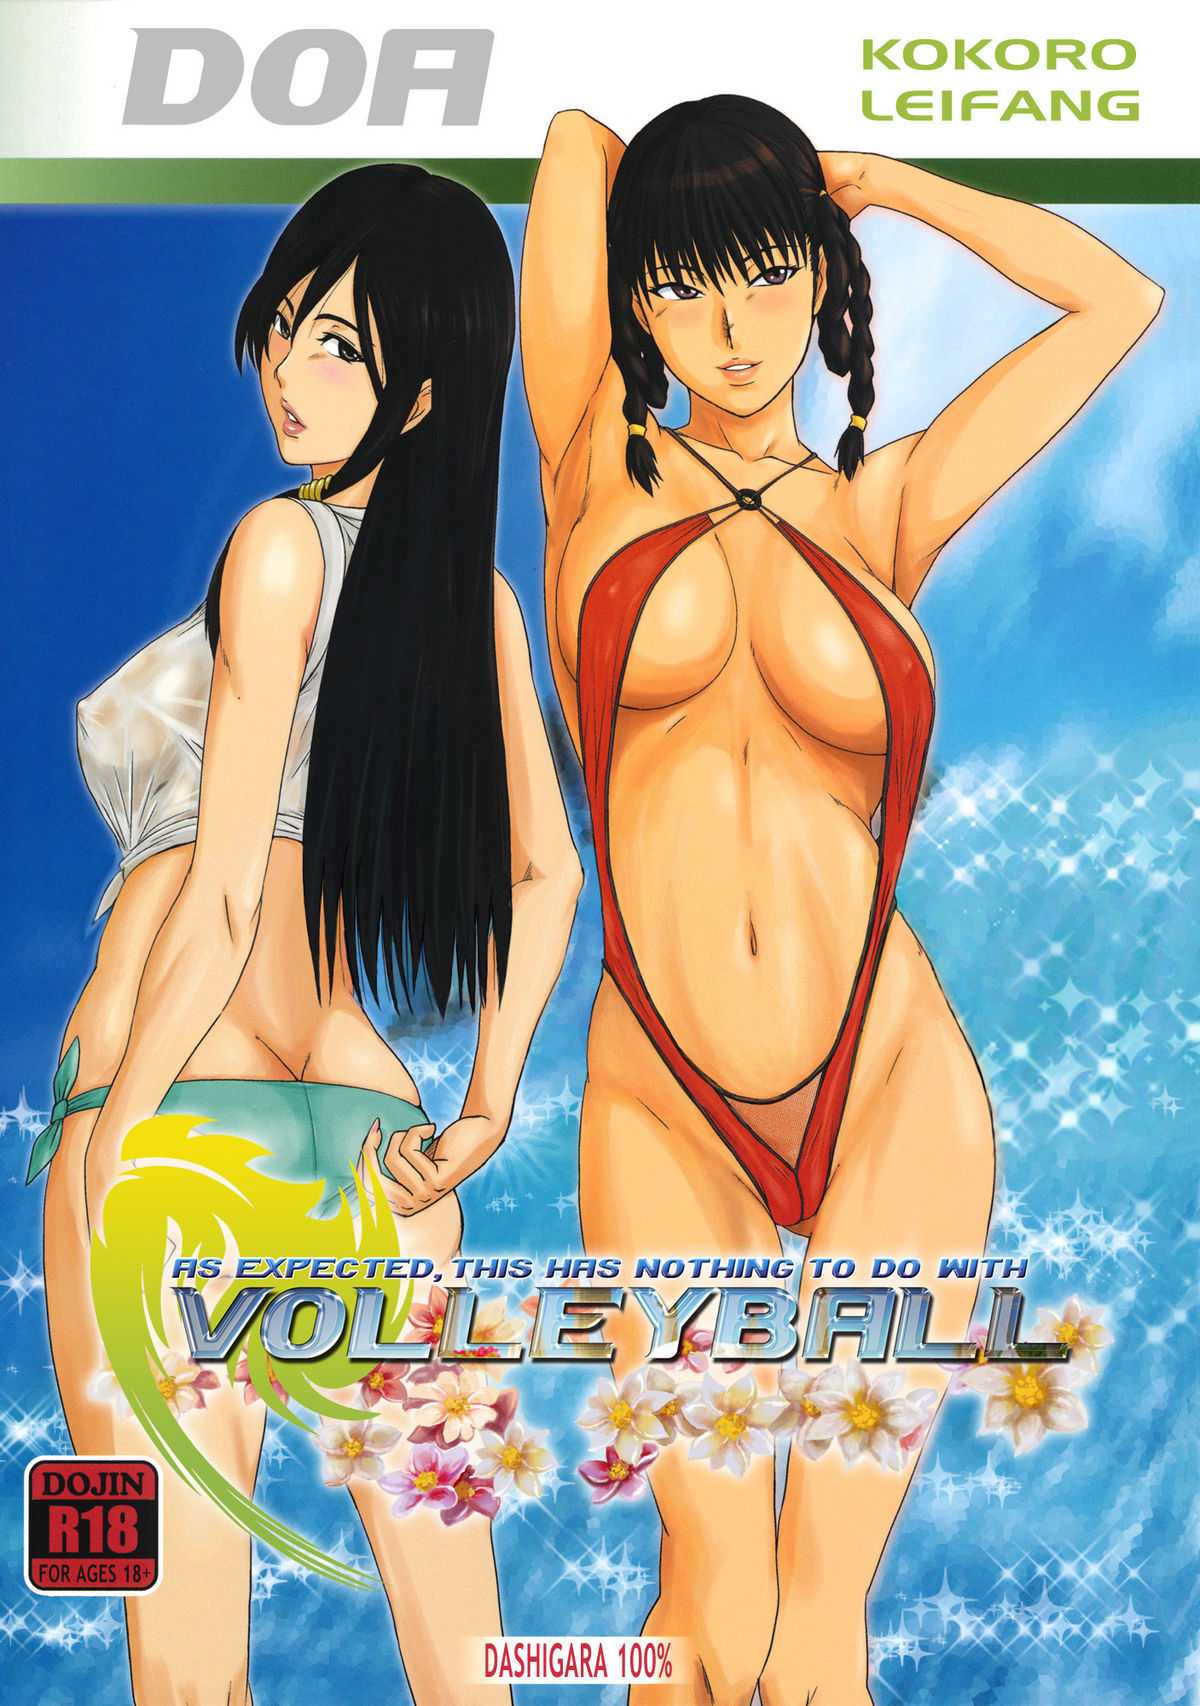 [Dashigara 100%] As Expected, This Has Nothing to do with Volley-Ball [Eng] (Dead or Alive)  